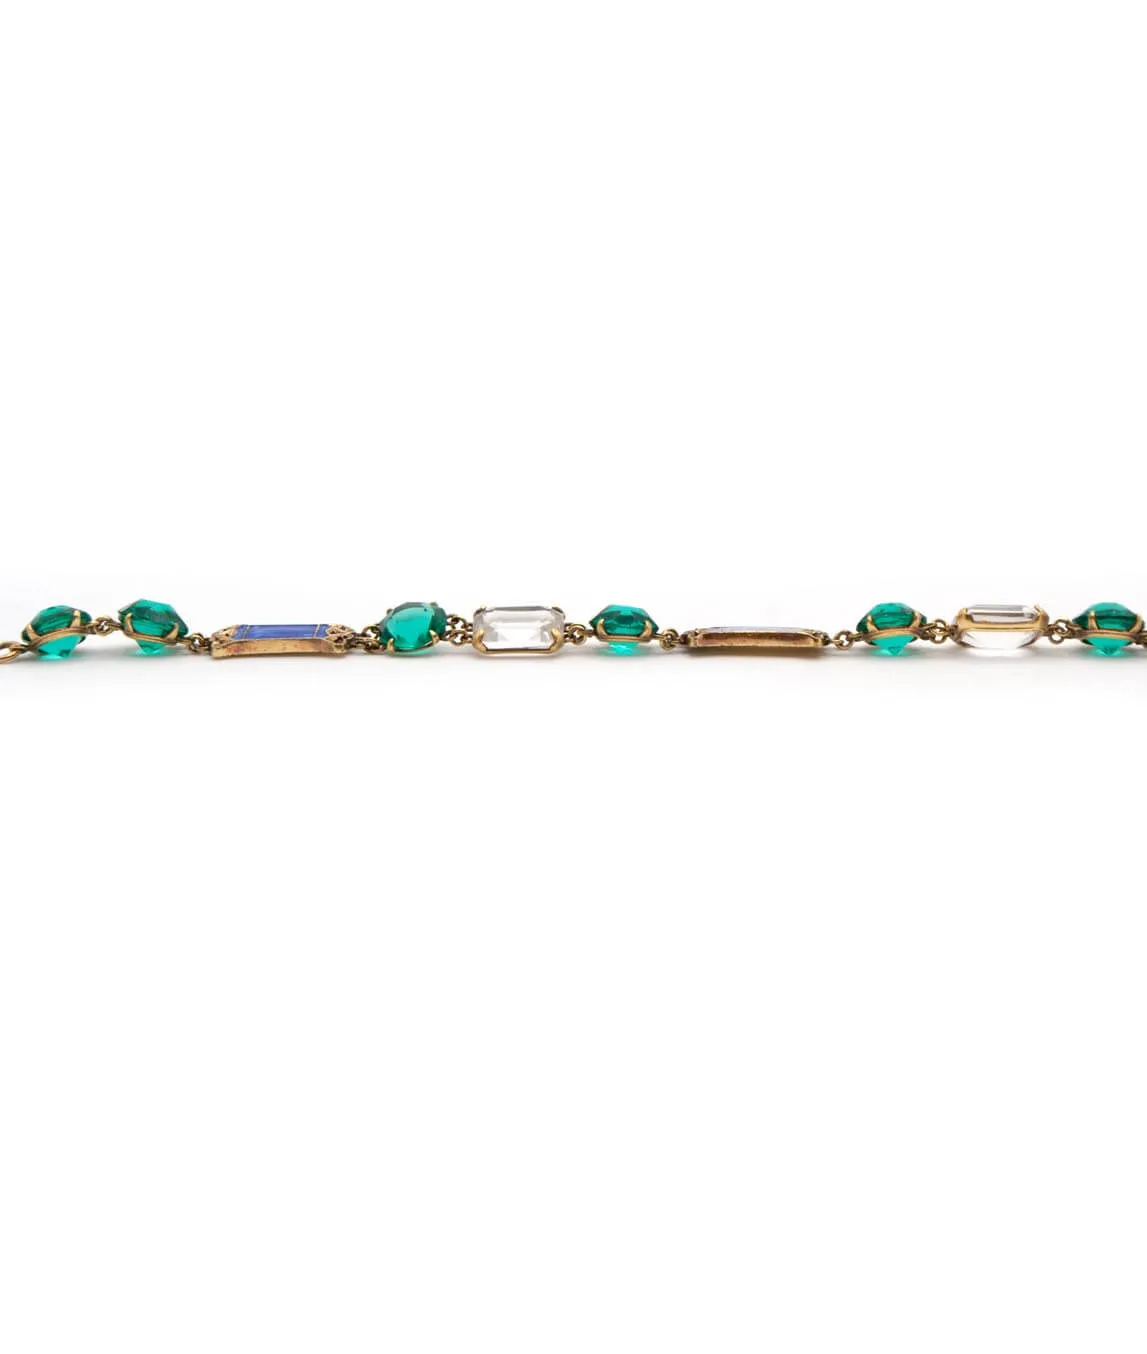 1930s plated bracelet with green and clear paste stones